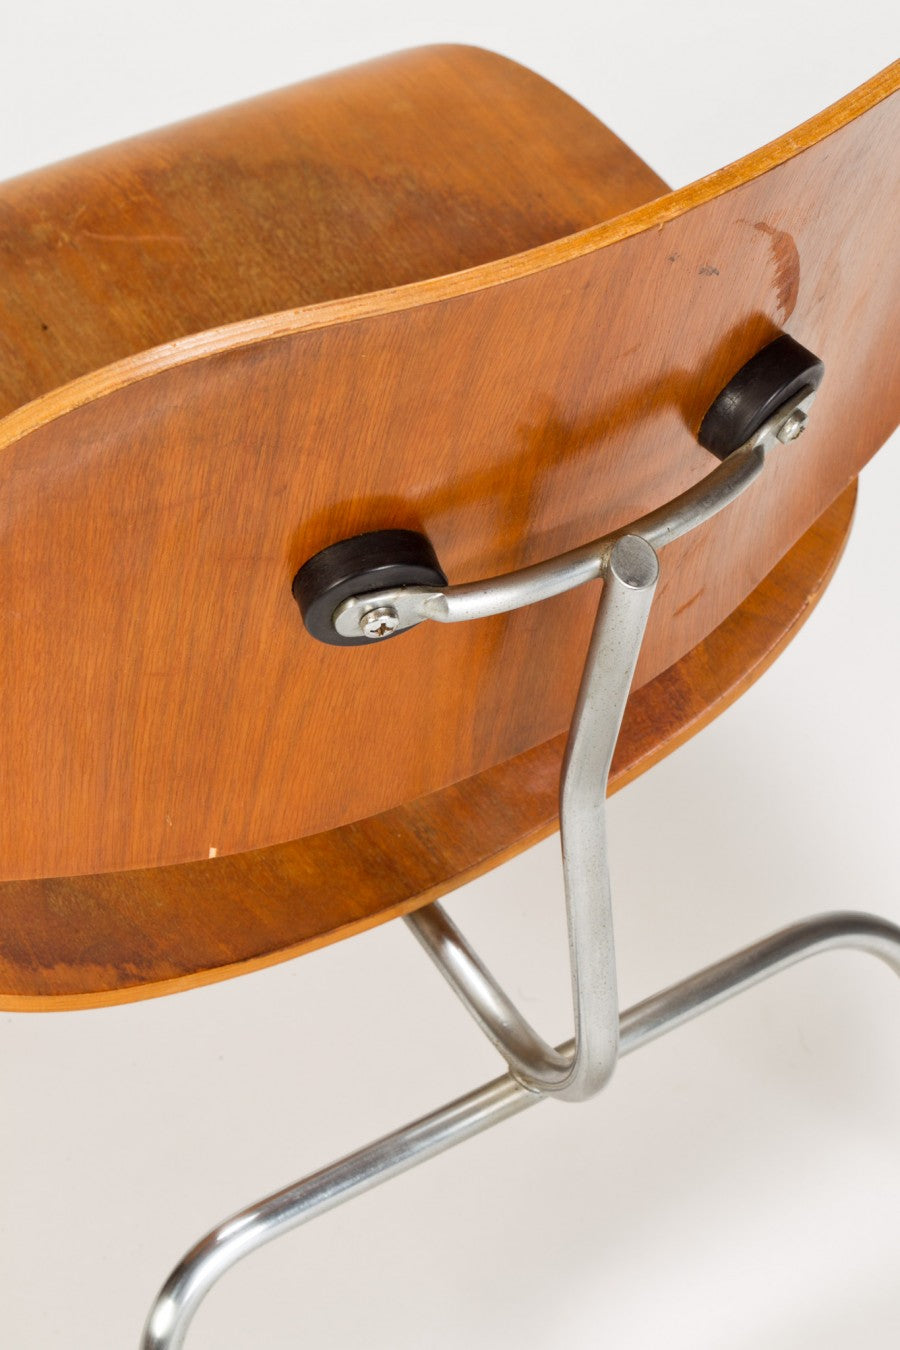 Eames LCM Sessel alte Version von Charles & Ray Eames